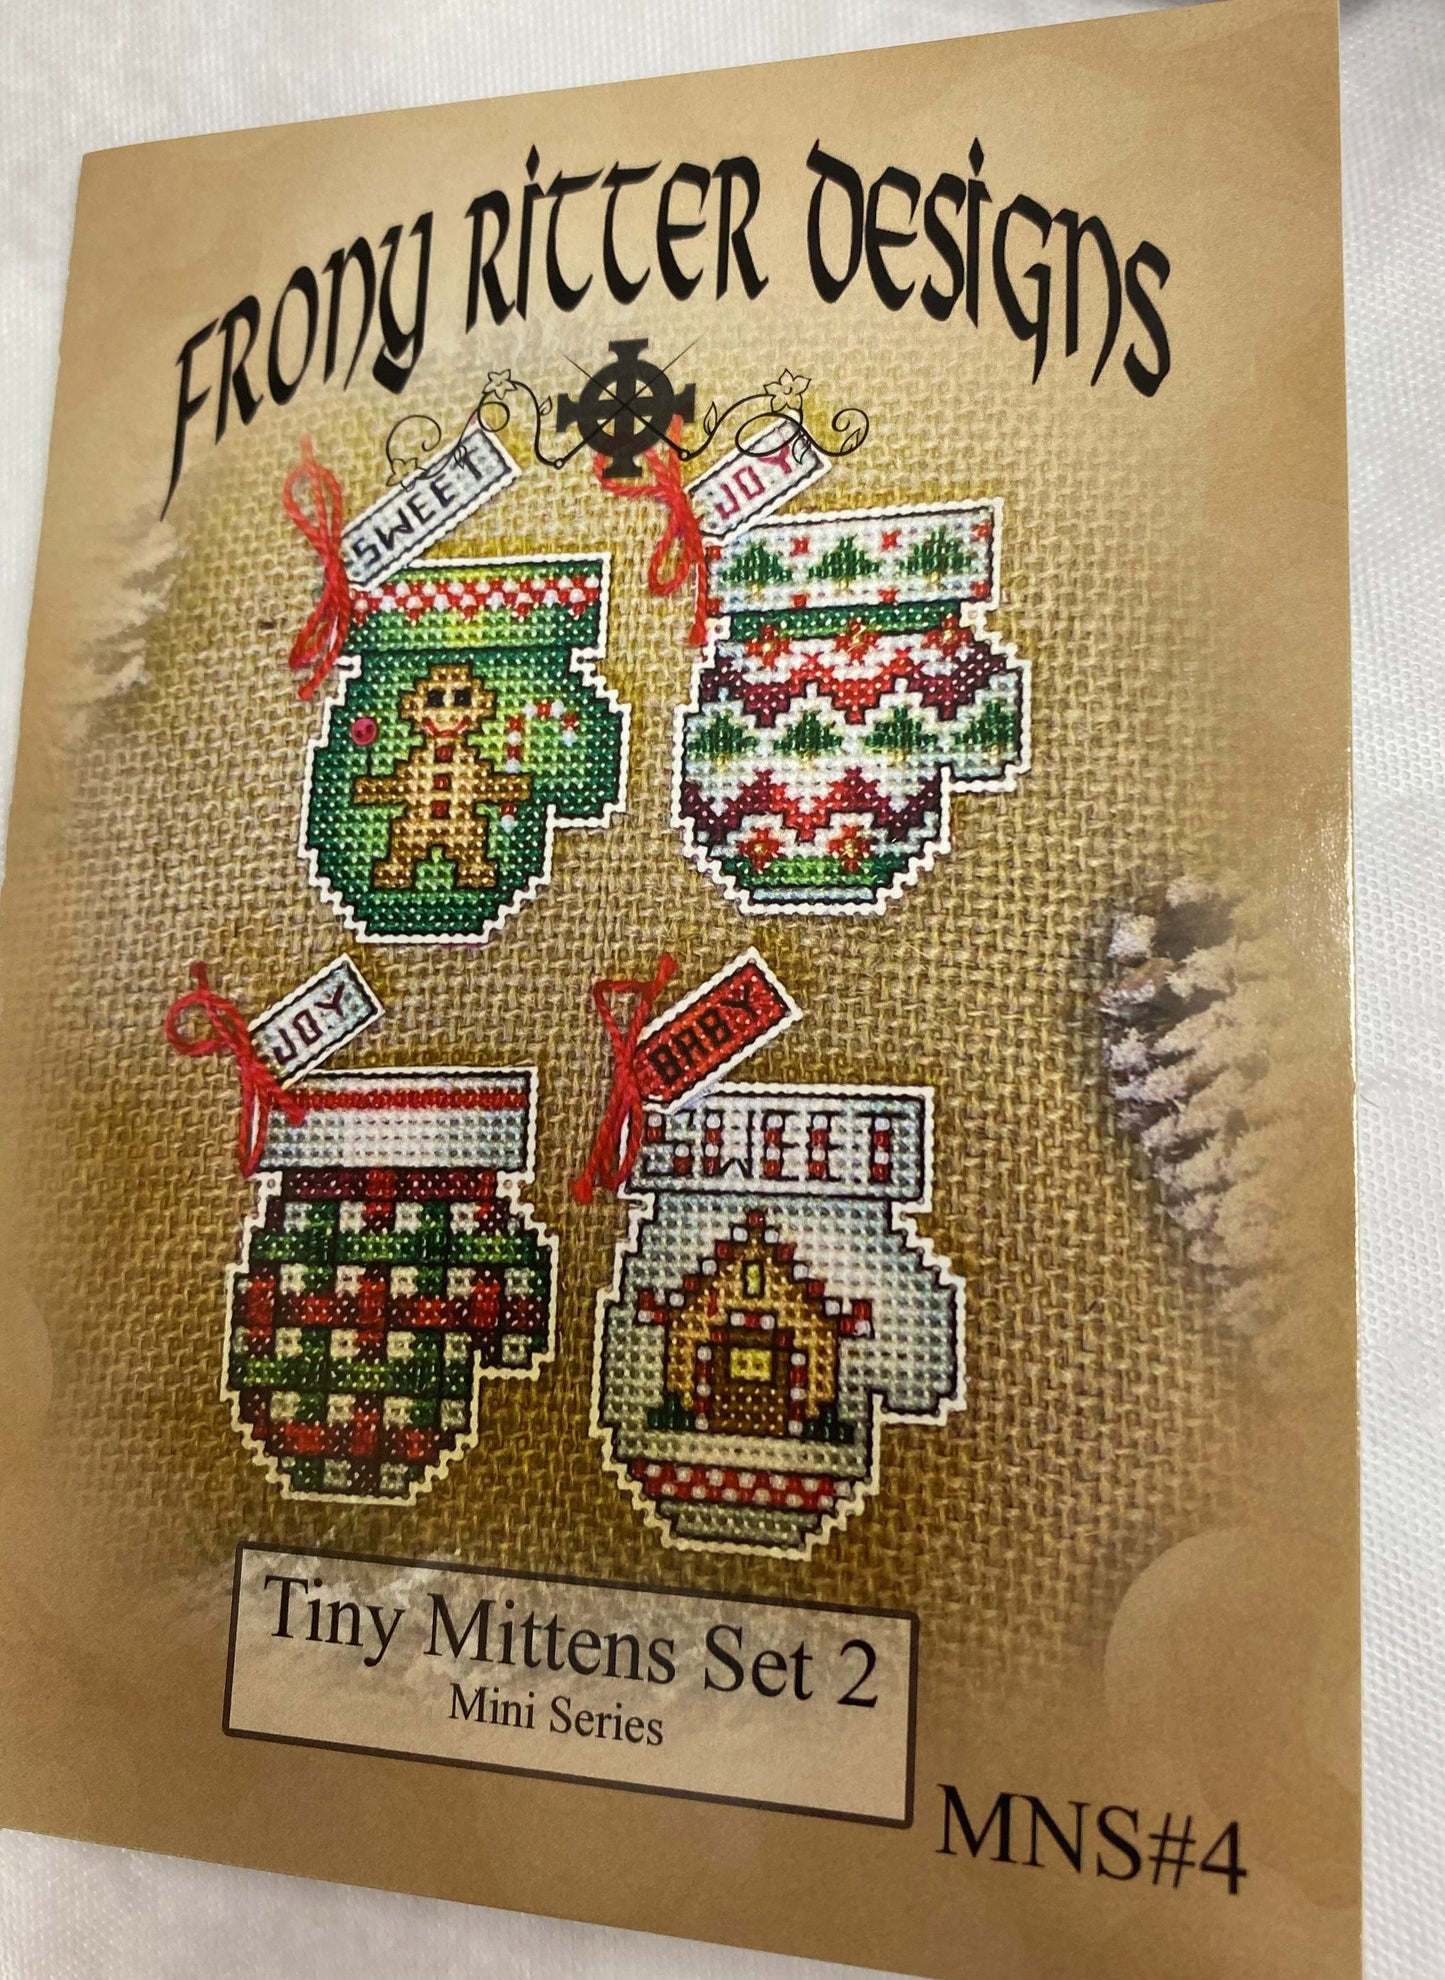 Tiny Mittens Set 2 by Frony Ritter Designs